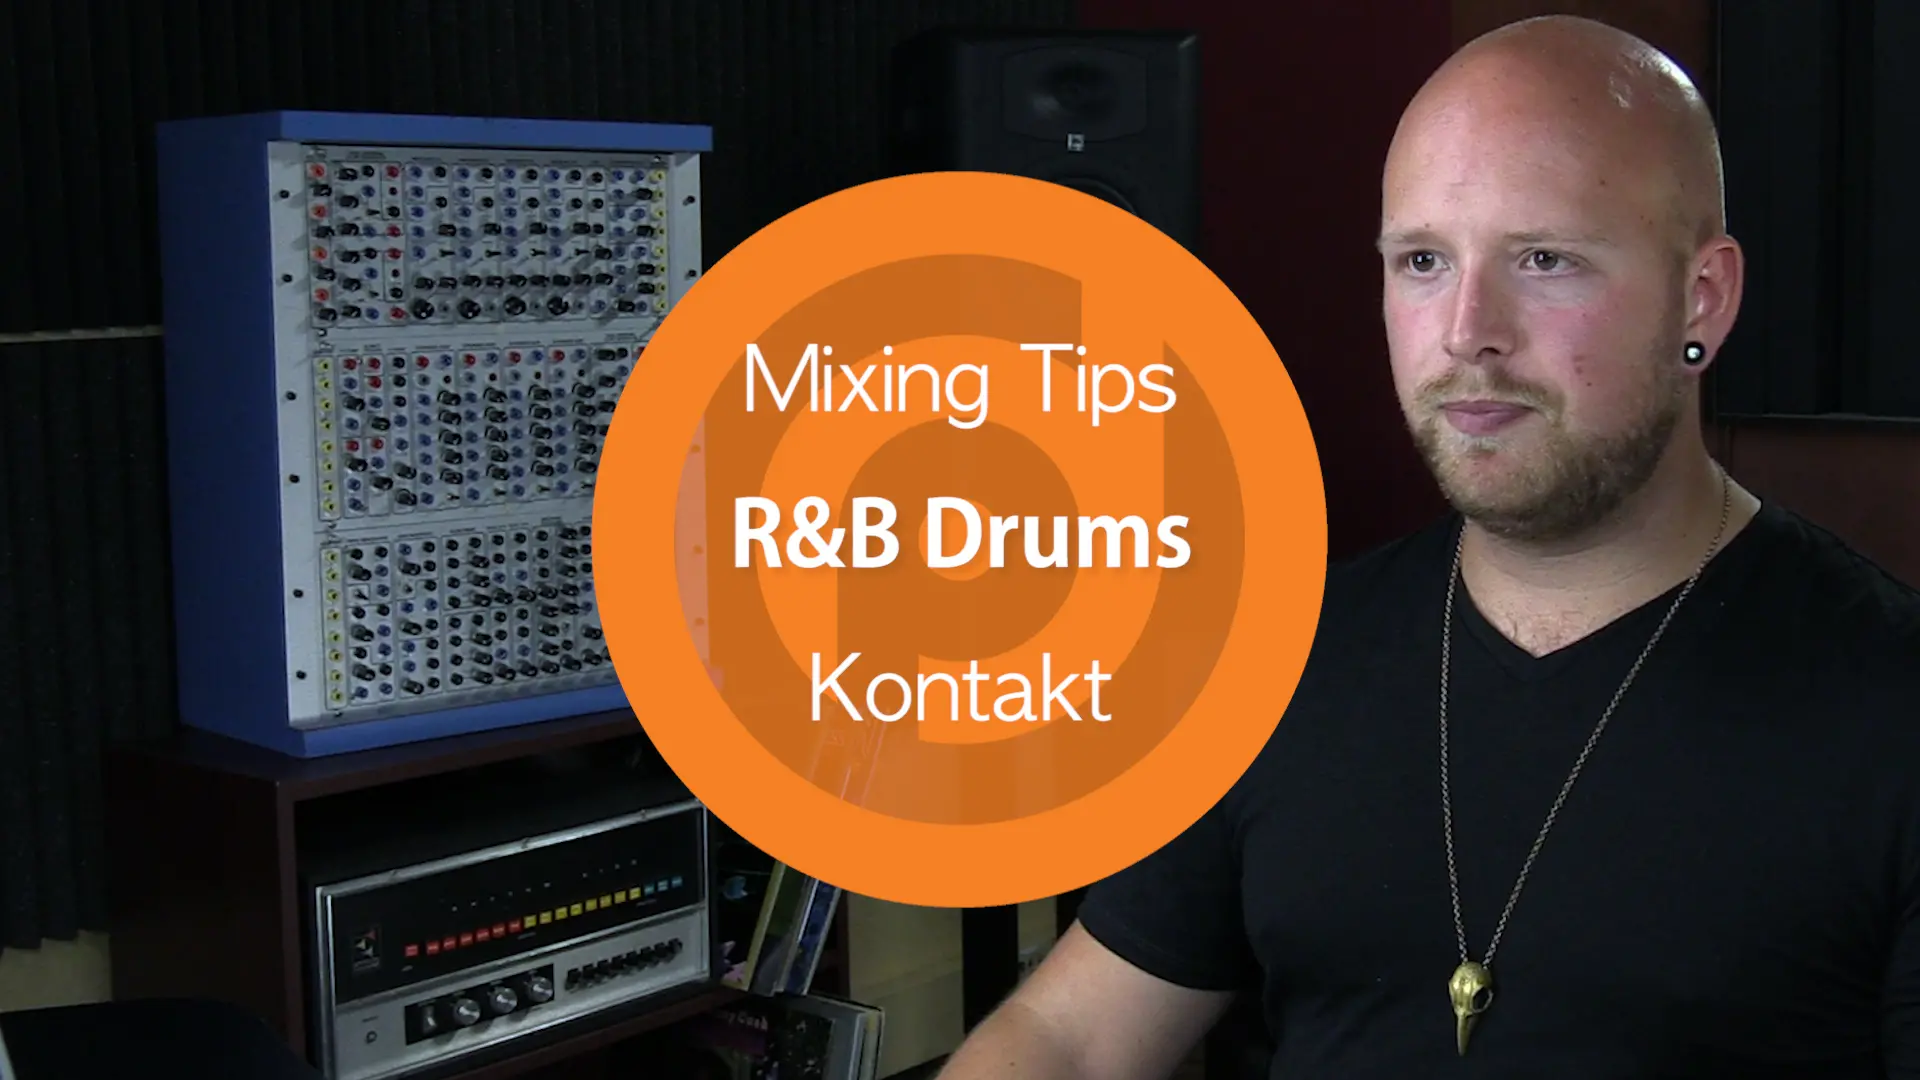 A skilled music producer specializing in beatmaking and mixing/mastering techniques, offering tips for utilizing RB drums and the Konkat software.